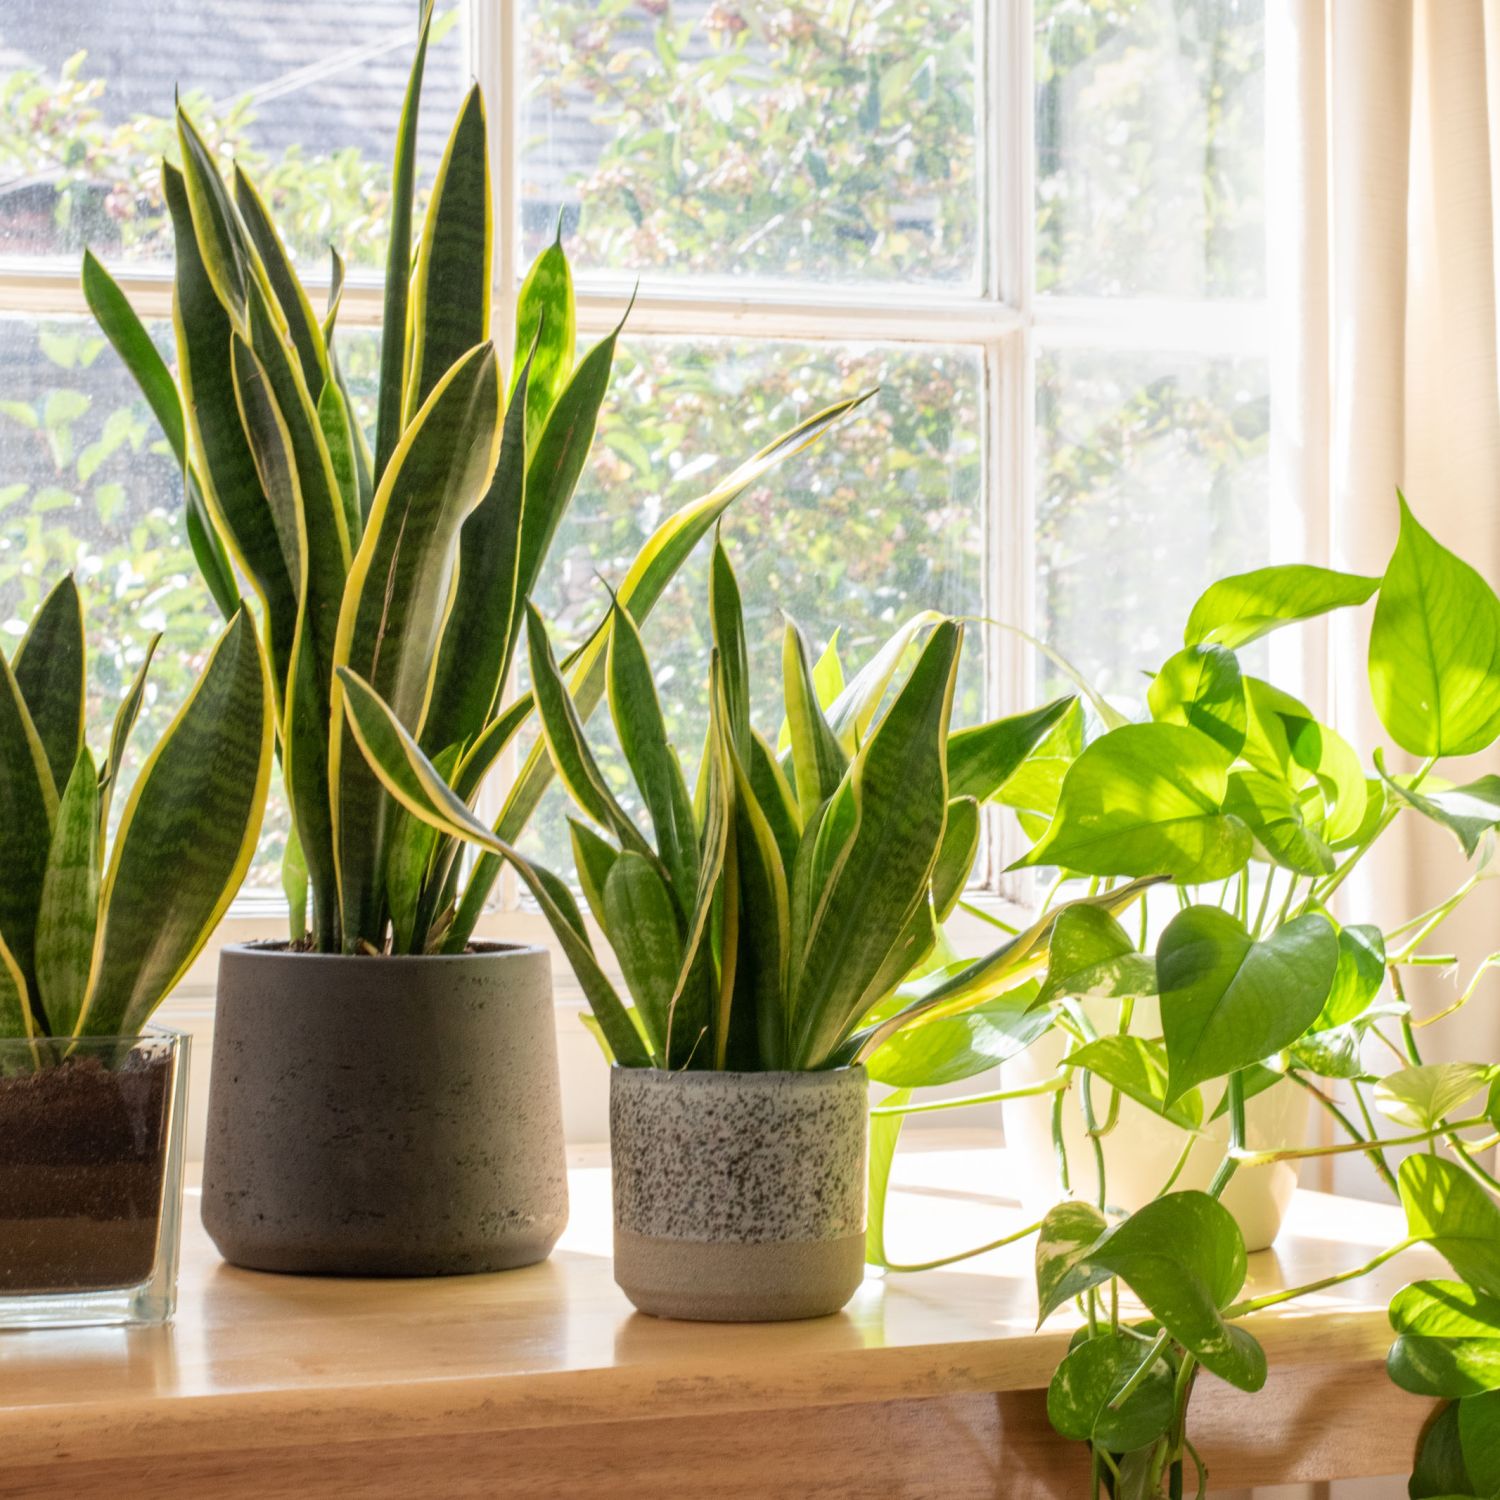 Snake plants and a golden pothos by the window.